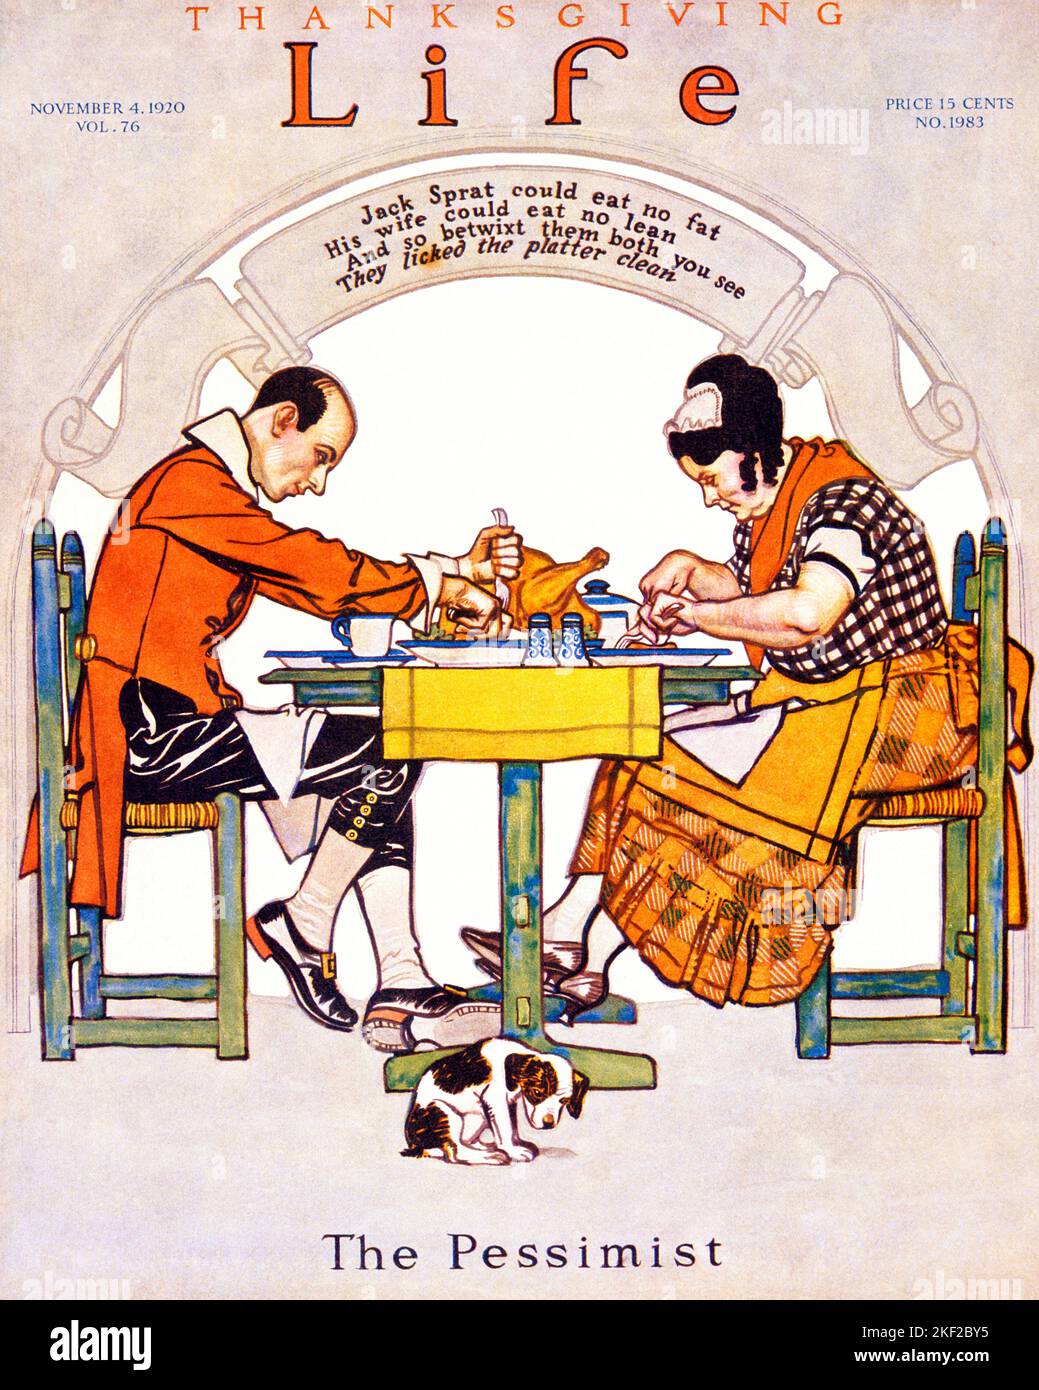 1920s JACK SPRAT AND WIFE EATING LEAN AND FAT WHICH LEAVES NO LEFTOVER FOR DOG UNDER THE TABLE THANKSGIVING ISSUE OF LIFE 1920 - kh13586 NAW001 HARS CELEBRATION FEMALES MARRIED SPOUSE HUSBANDS HOME LIFE COPY SPACE FRIENDSHIP FULL-LENGTH LADIES PERSONS MALES AMERICANA PARTNER SADNESS HAPPINESS MAMMALS AND CANINES THANKFUL POOCH SUPPER CONNECTION THURSDAY CONCEPTUAL ISSUE NATIONAL HOLIDAY GRATEFUL CANINE COOPERATION LEAN MAMMAL MID-ADULT MID-ADULT MAN MID-ADULT WOMAN NOVEMBER TOGETHERNESS WIVES CAUCASIAN ETHNICITY OLD FASHIONED Stock Photo